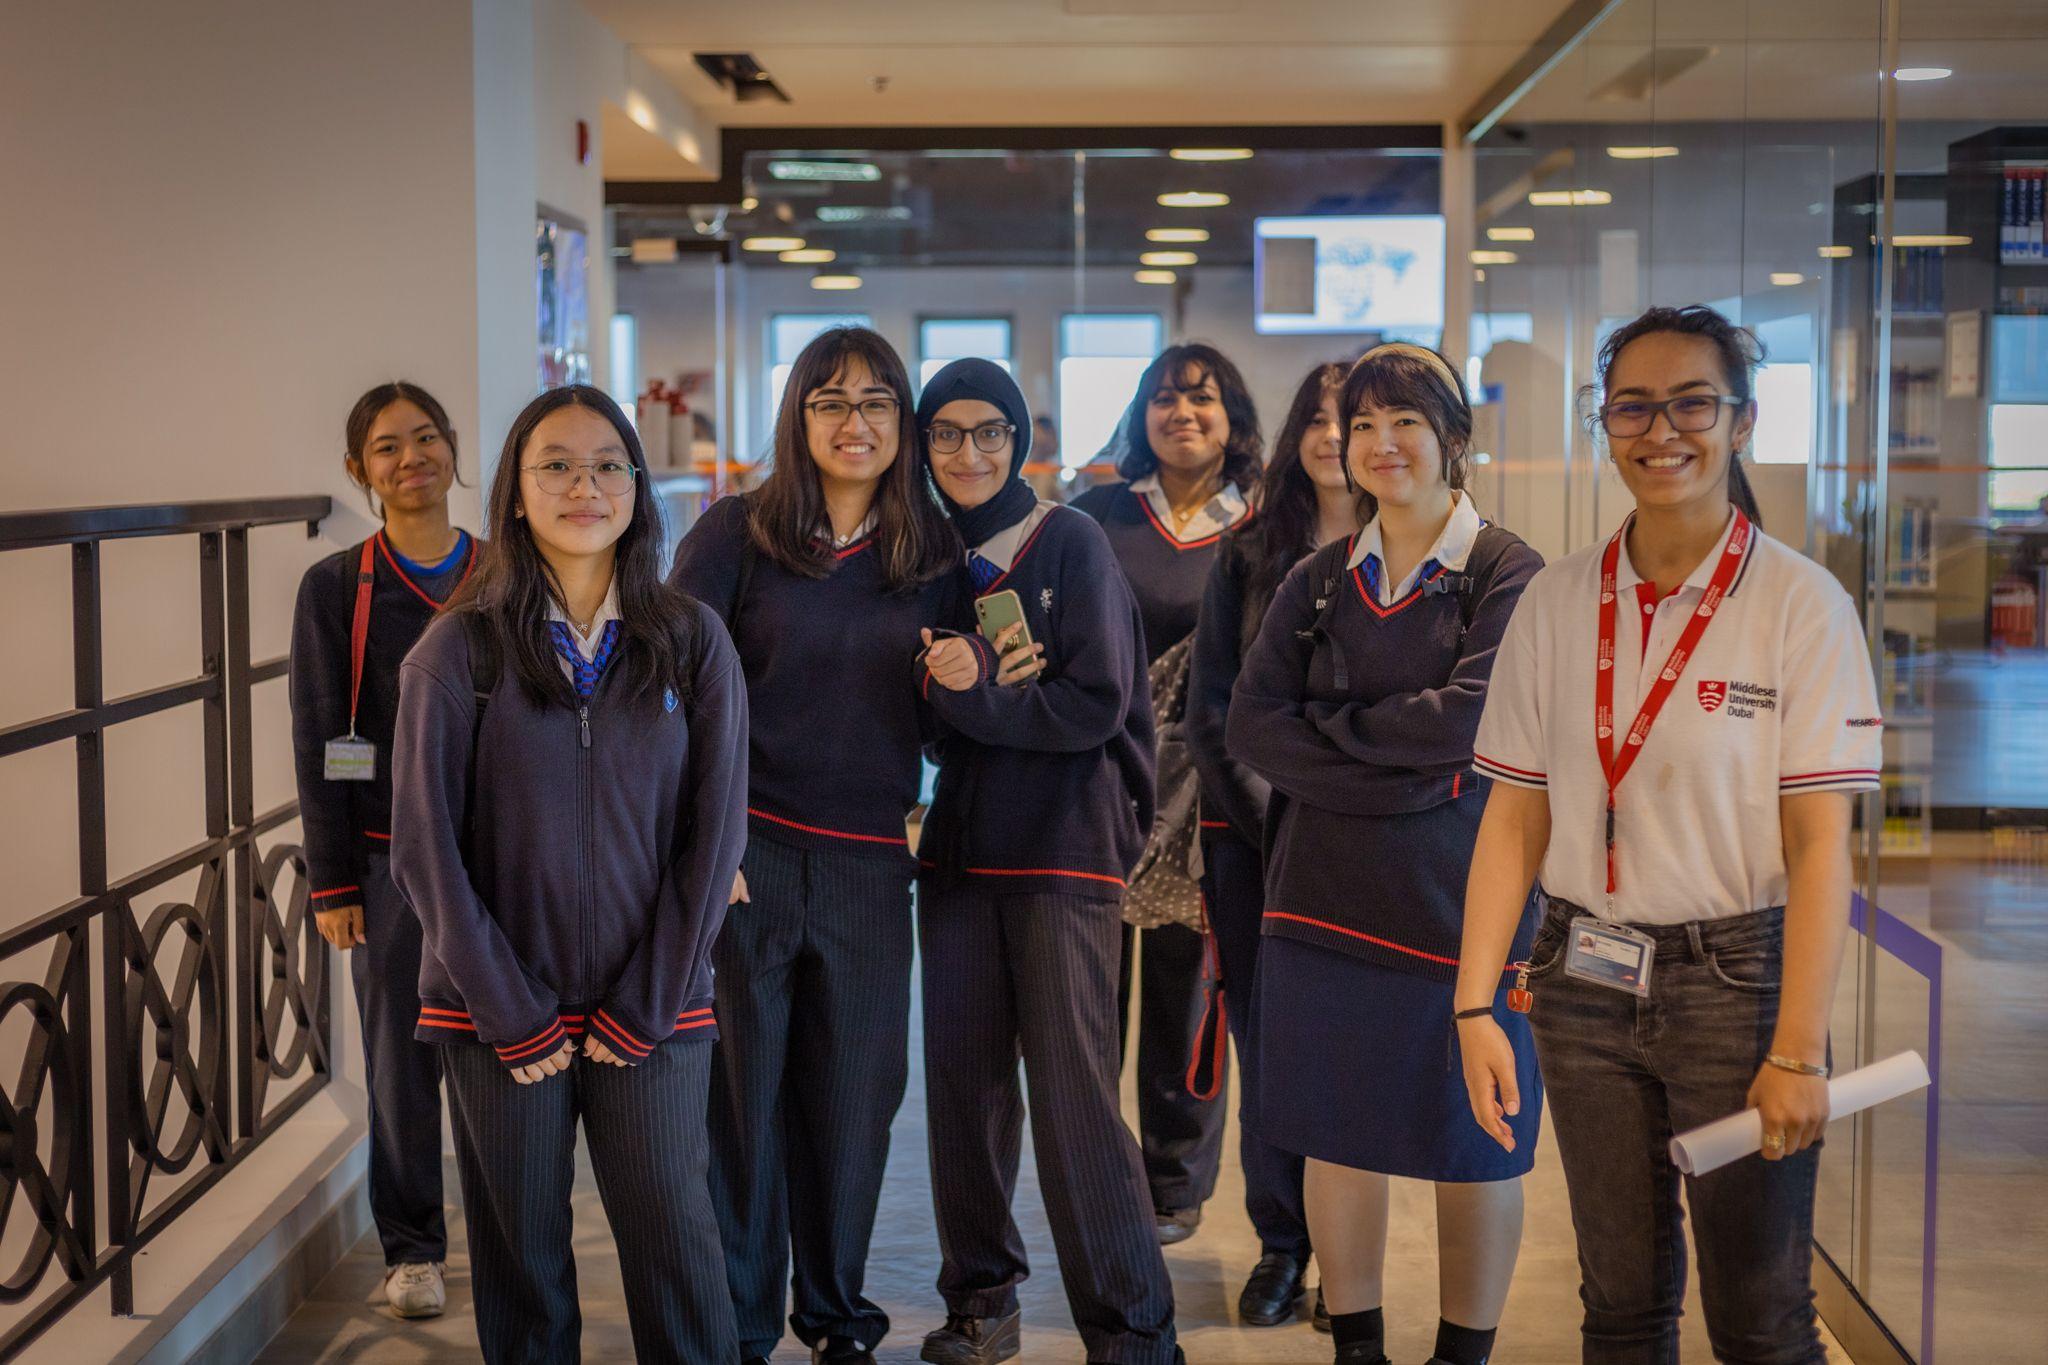 Middlesex University Dubai’s highly anticipated Schools Week returned to classrooms across the UAE from 8th-11th May, as more than 100 schools counsellors, class teachers and students joined the UK university’s team virtually for four days of informative sessions about campus life in Dubai.